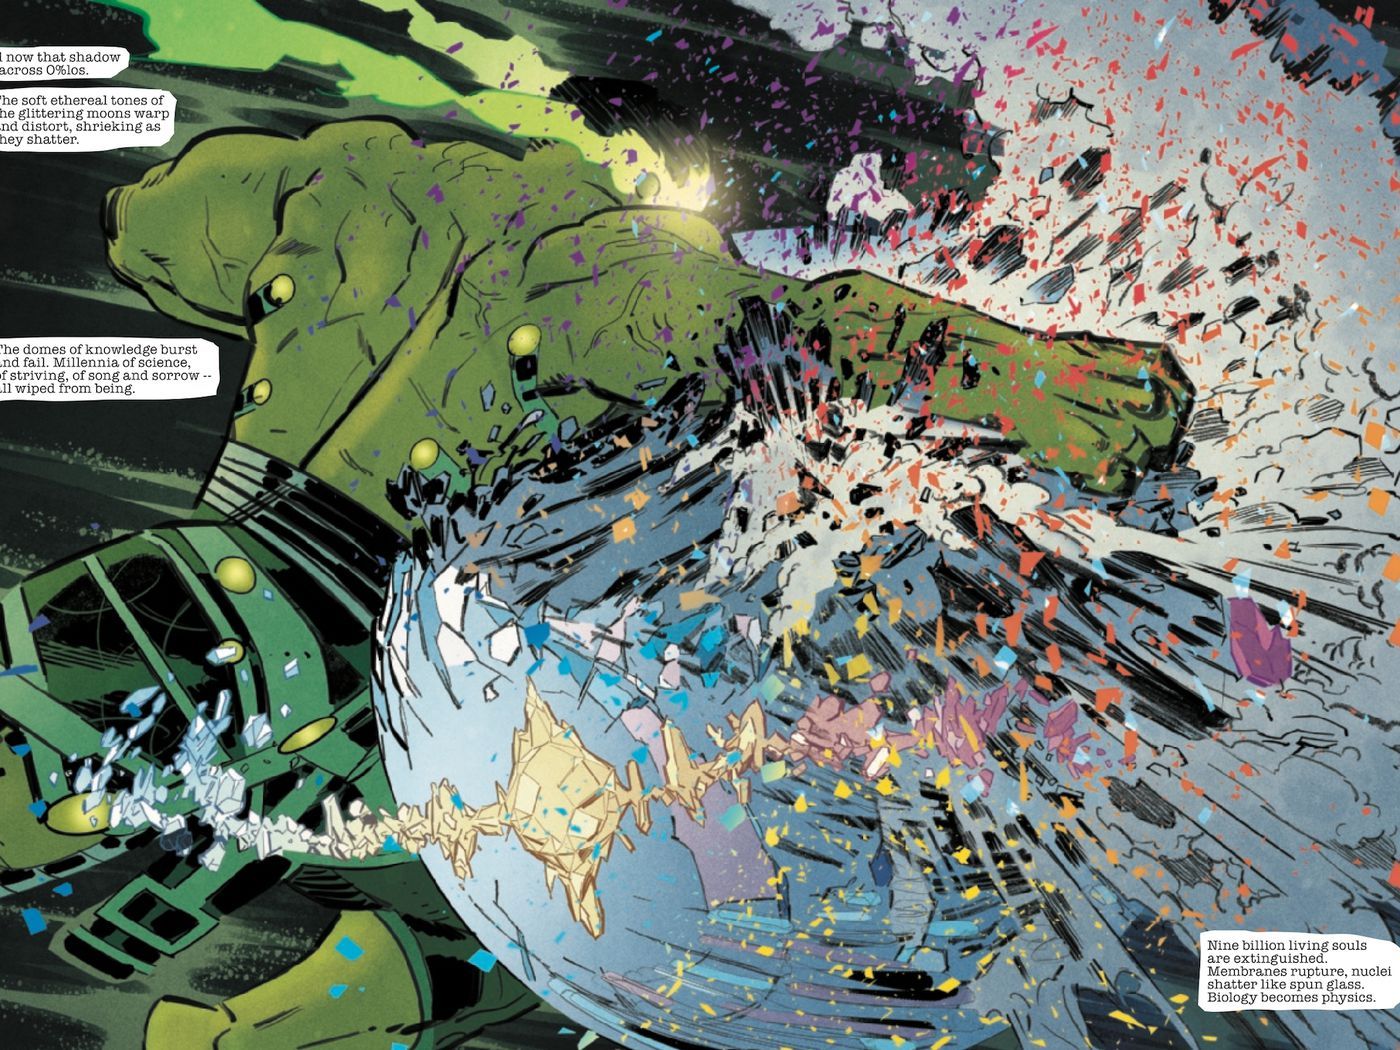 Immortal Hulk killed an entire universe in this week's issue